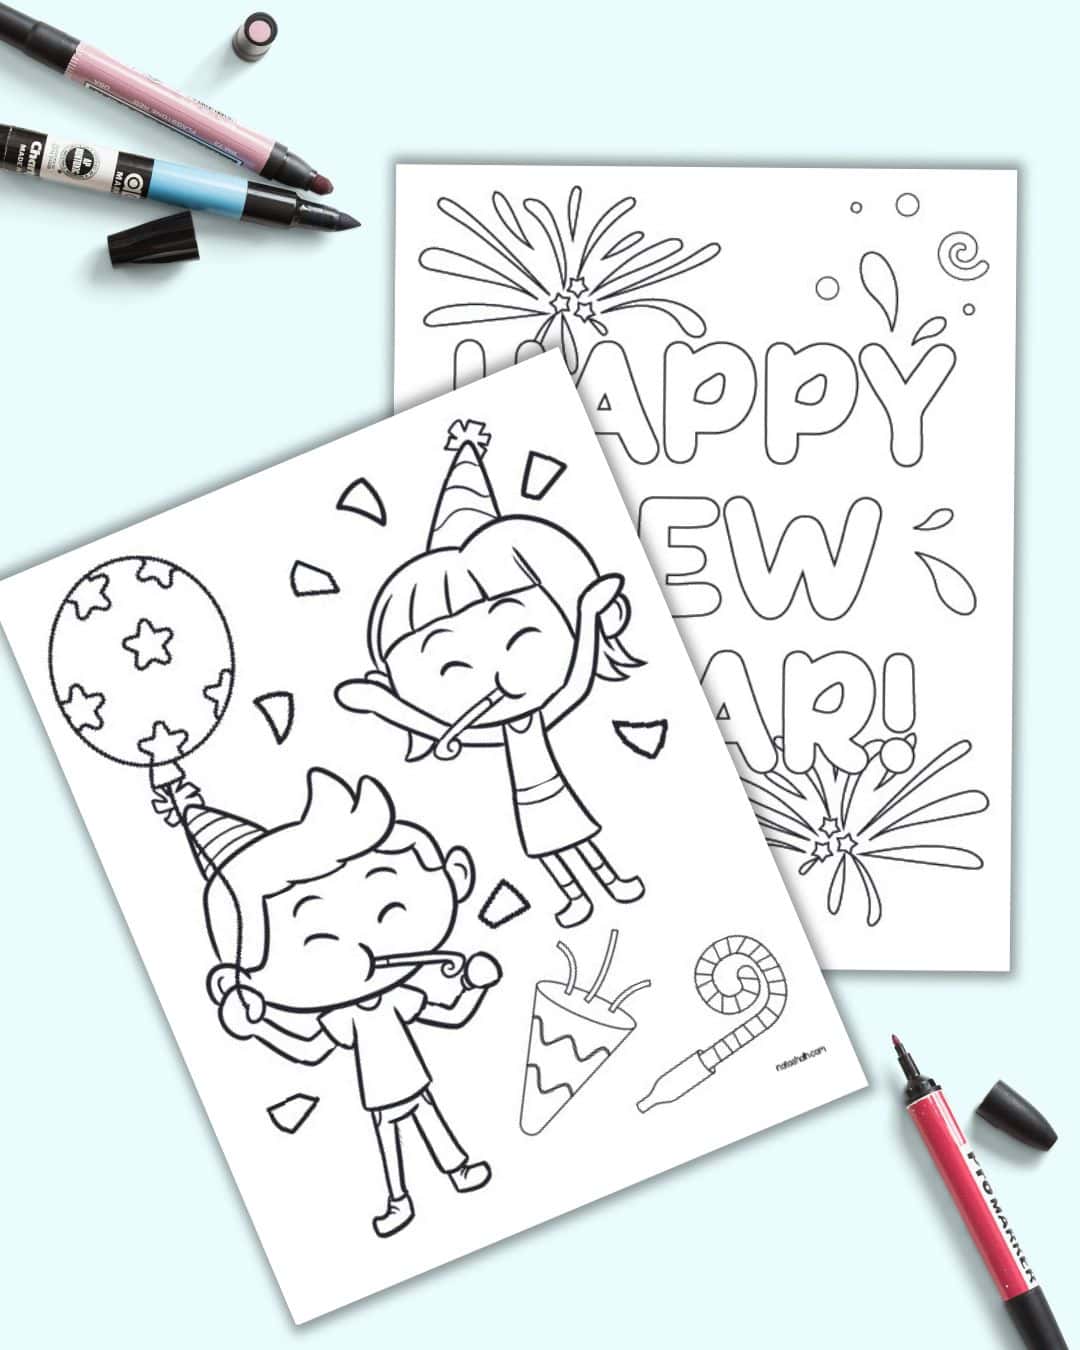 A preview of two New Year themed coloring pages for kids. One has two children blowing horns and the other page has the text "Happy Next Year!" with fireworks